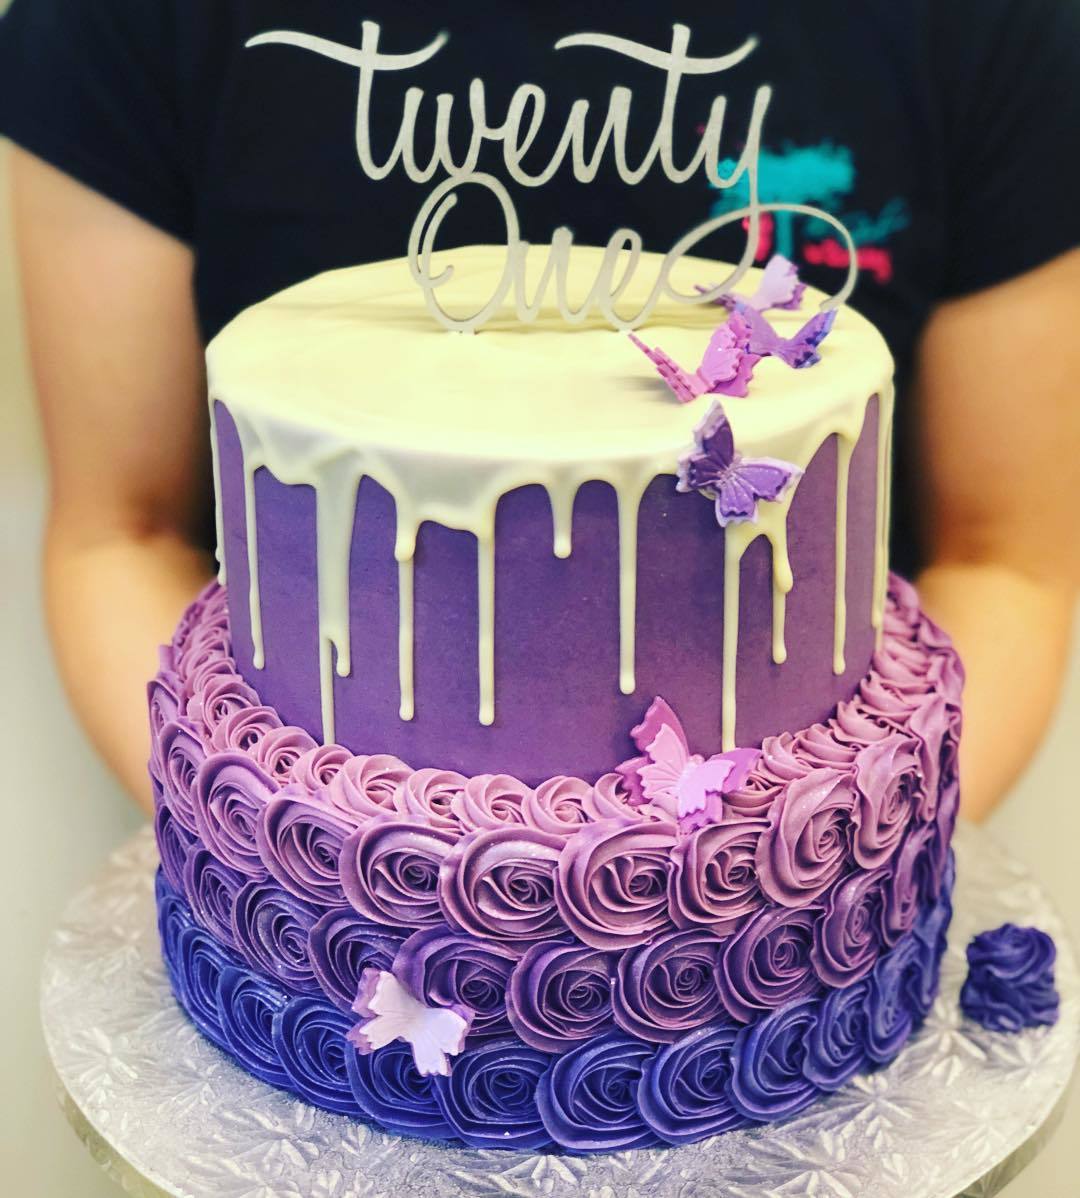 Two Tier Purple Ombre Rose Drip Cake - The Girl on the Swing